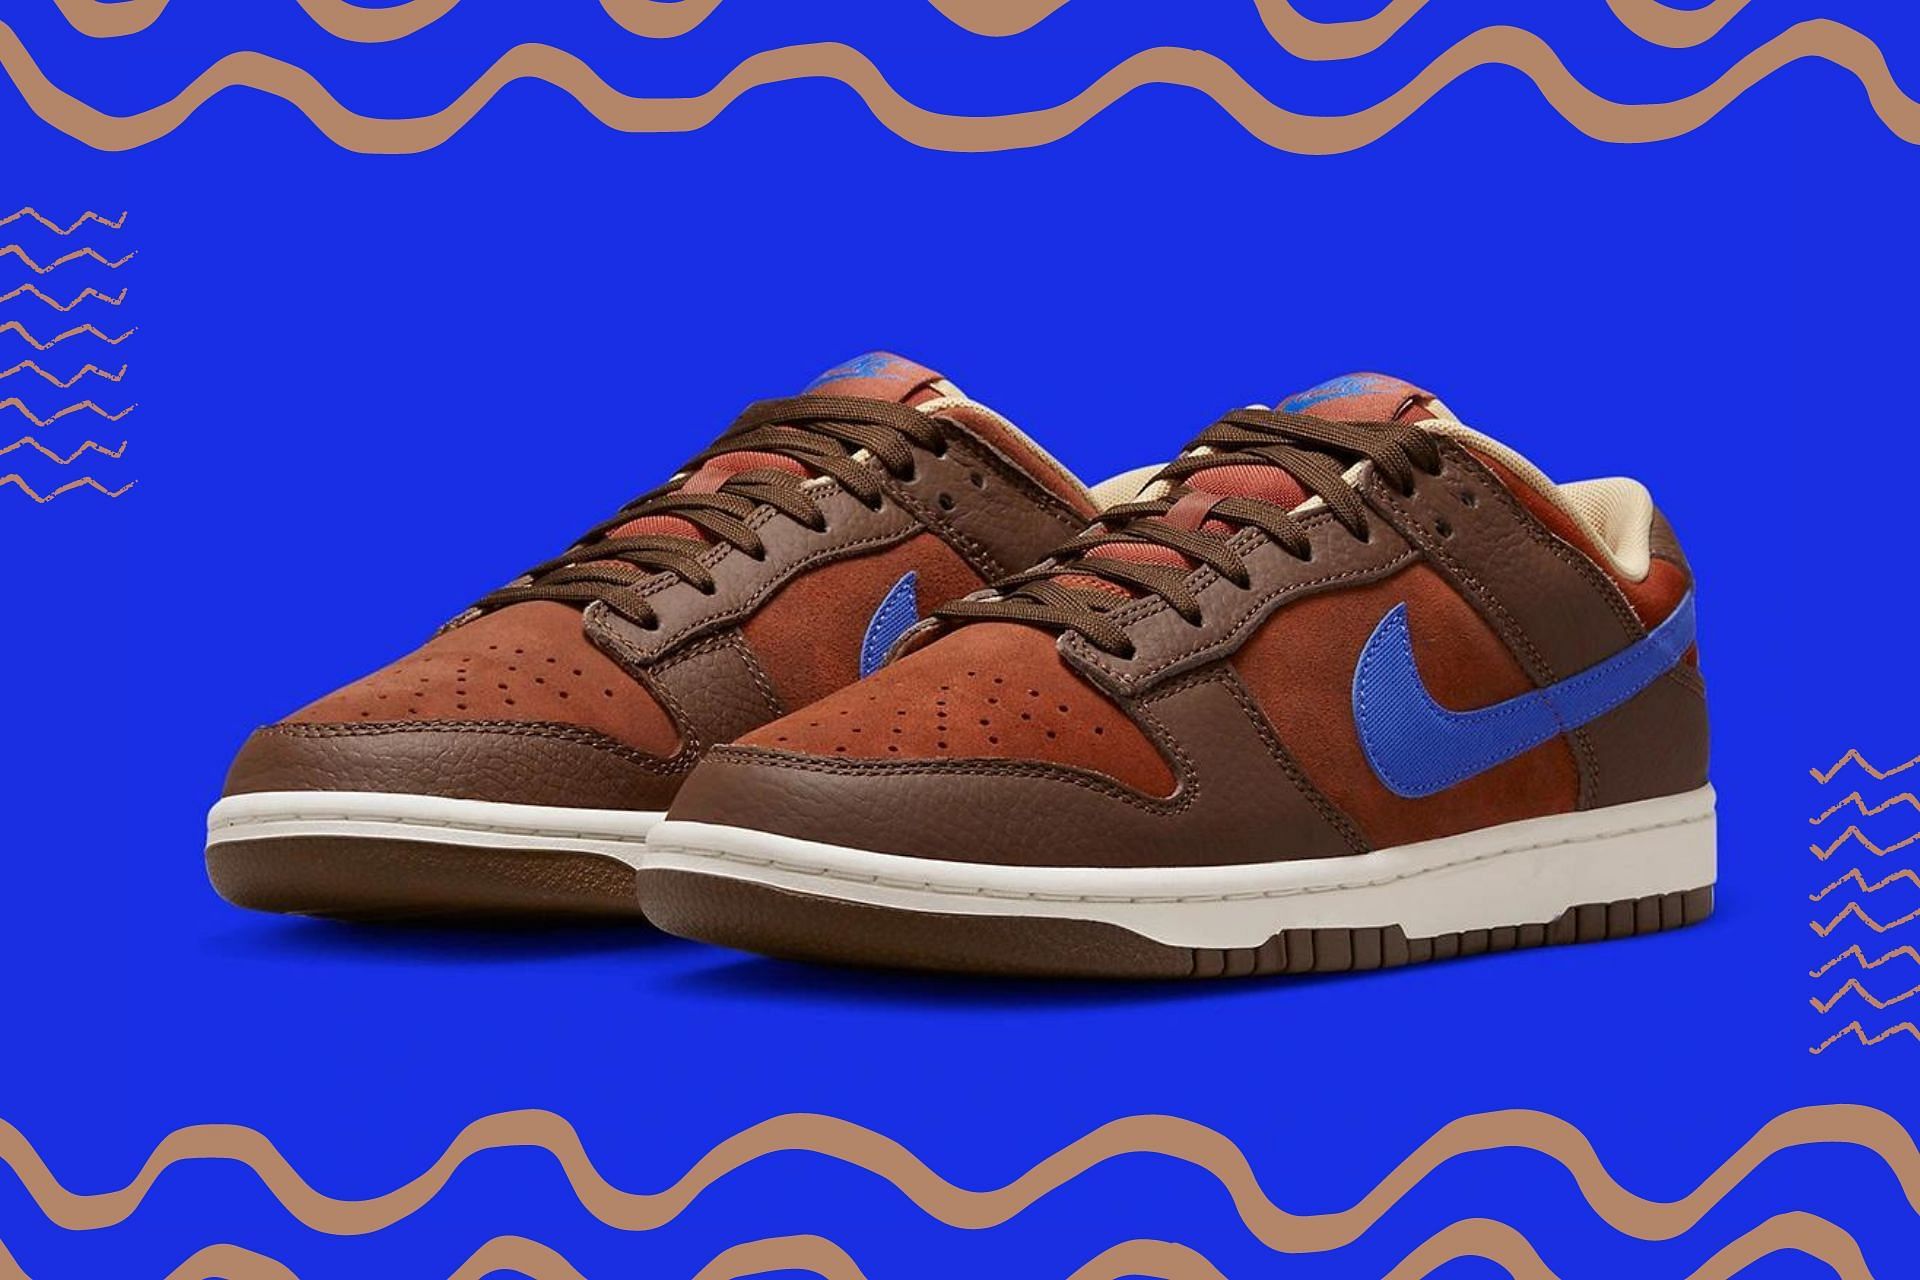 Where to buy Nike Dunk Low “Mars Stone” shoes? Price and more 